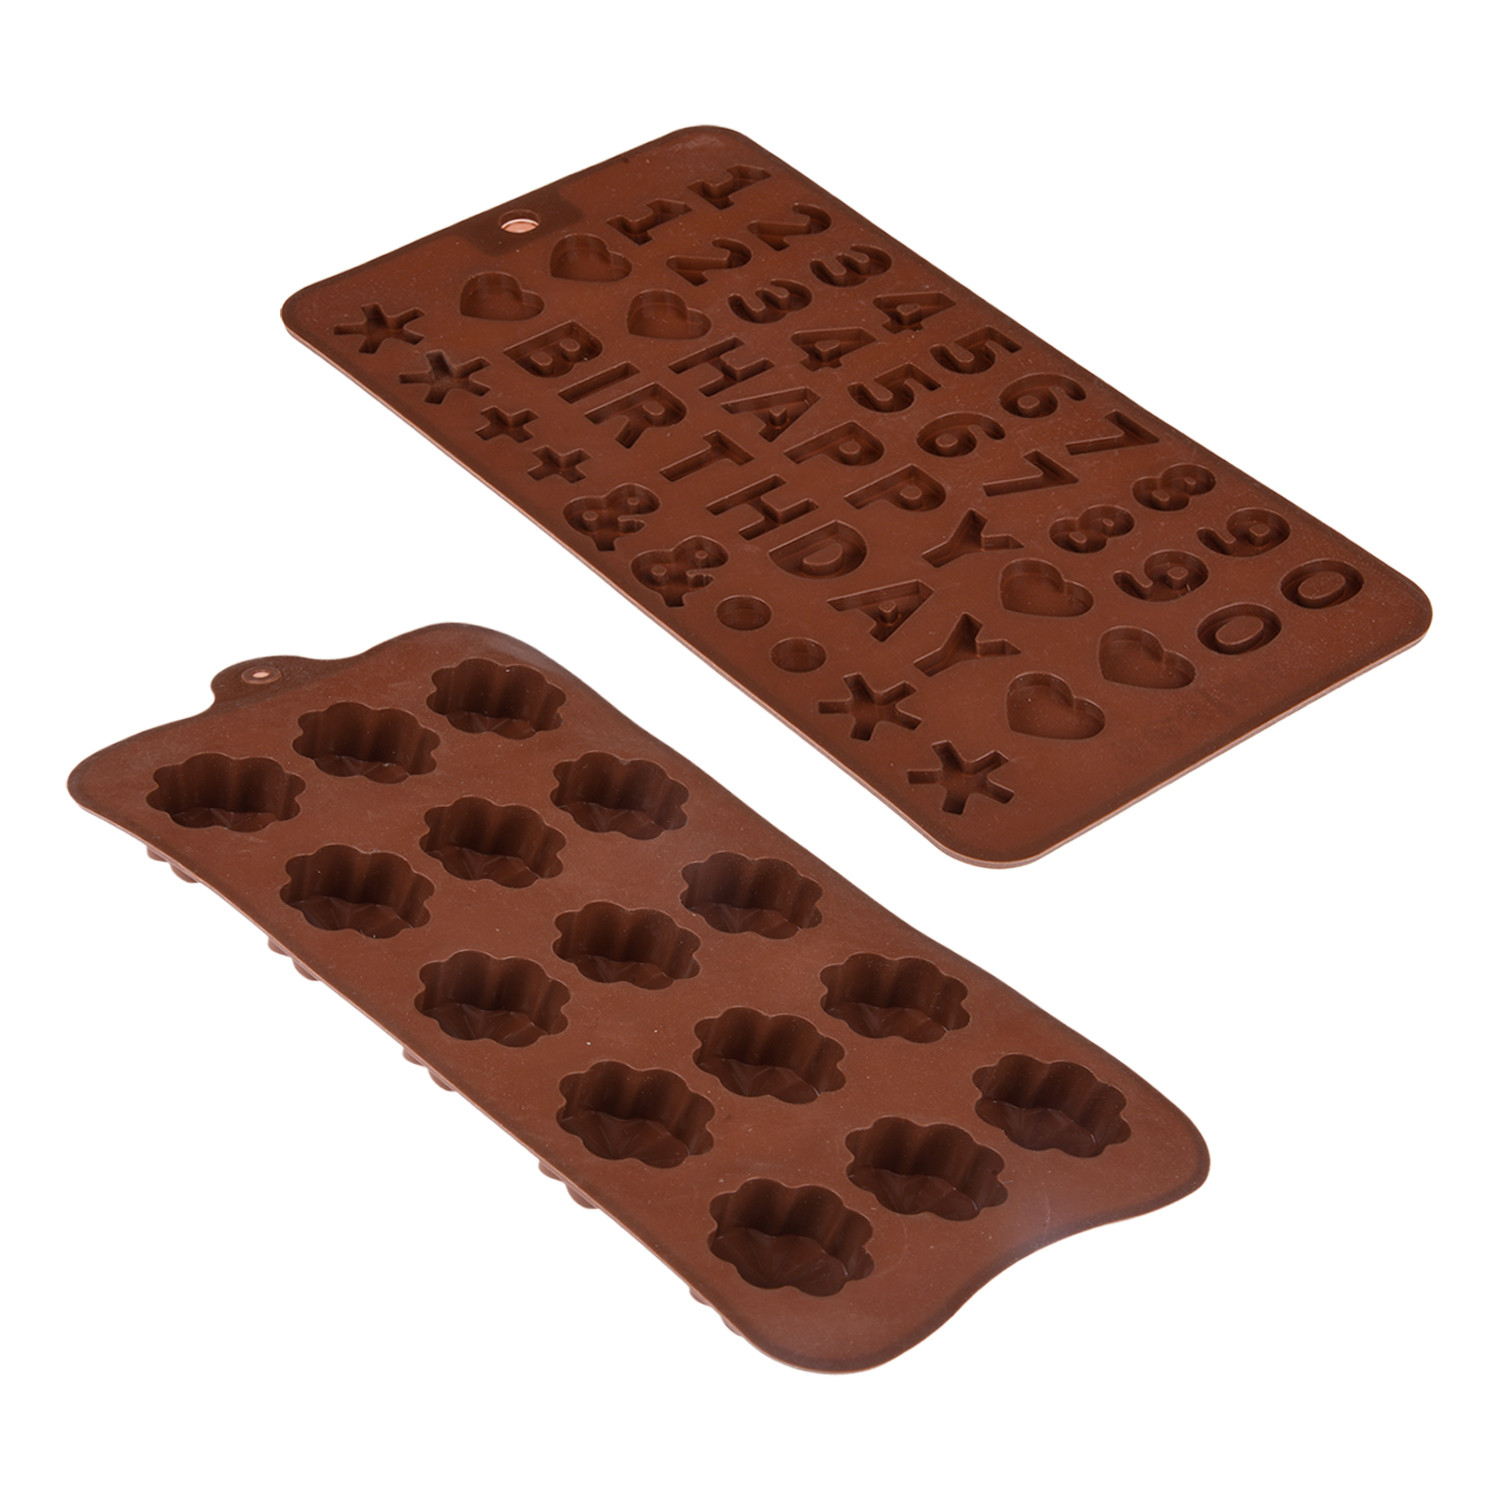 Kuber Industries Chocolate Mould | Silicone Cookies Mould Cake | Chocolate Cookies Tray | Chocolate Mould Tray | Non-Stick Cookies Moulds | Candy Mold Tray | Pack of 2 | Brown